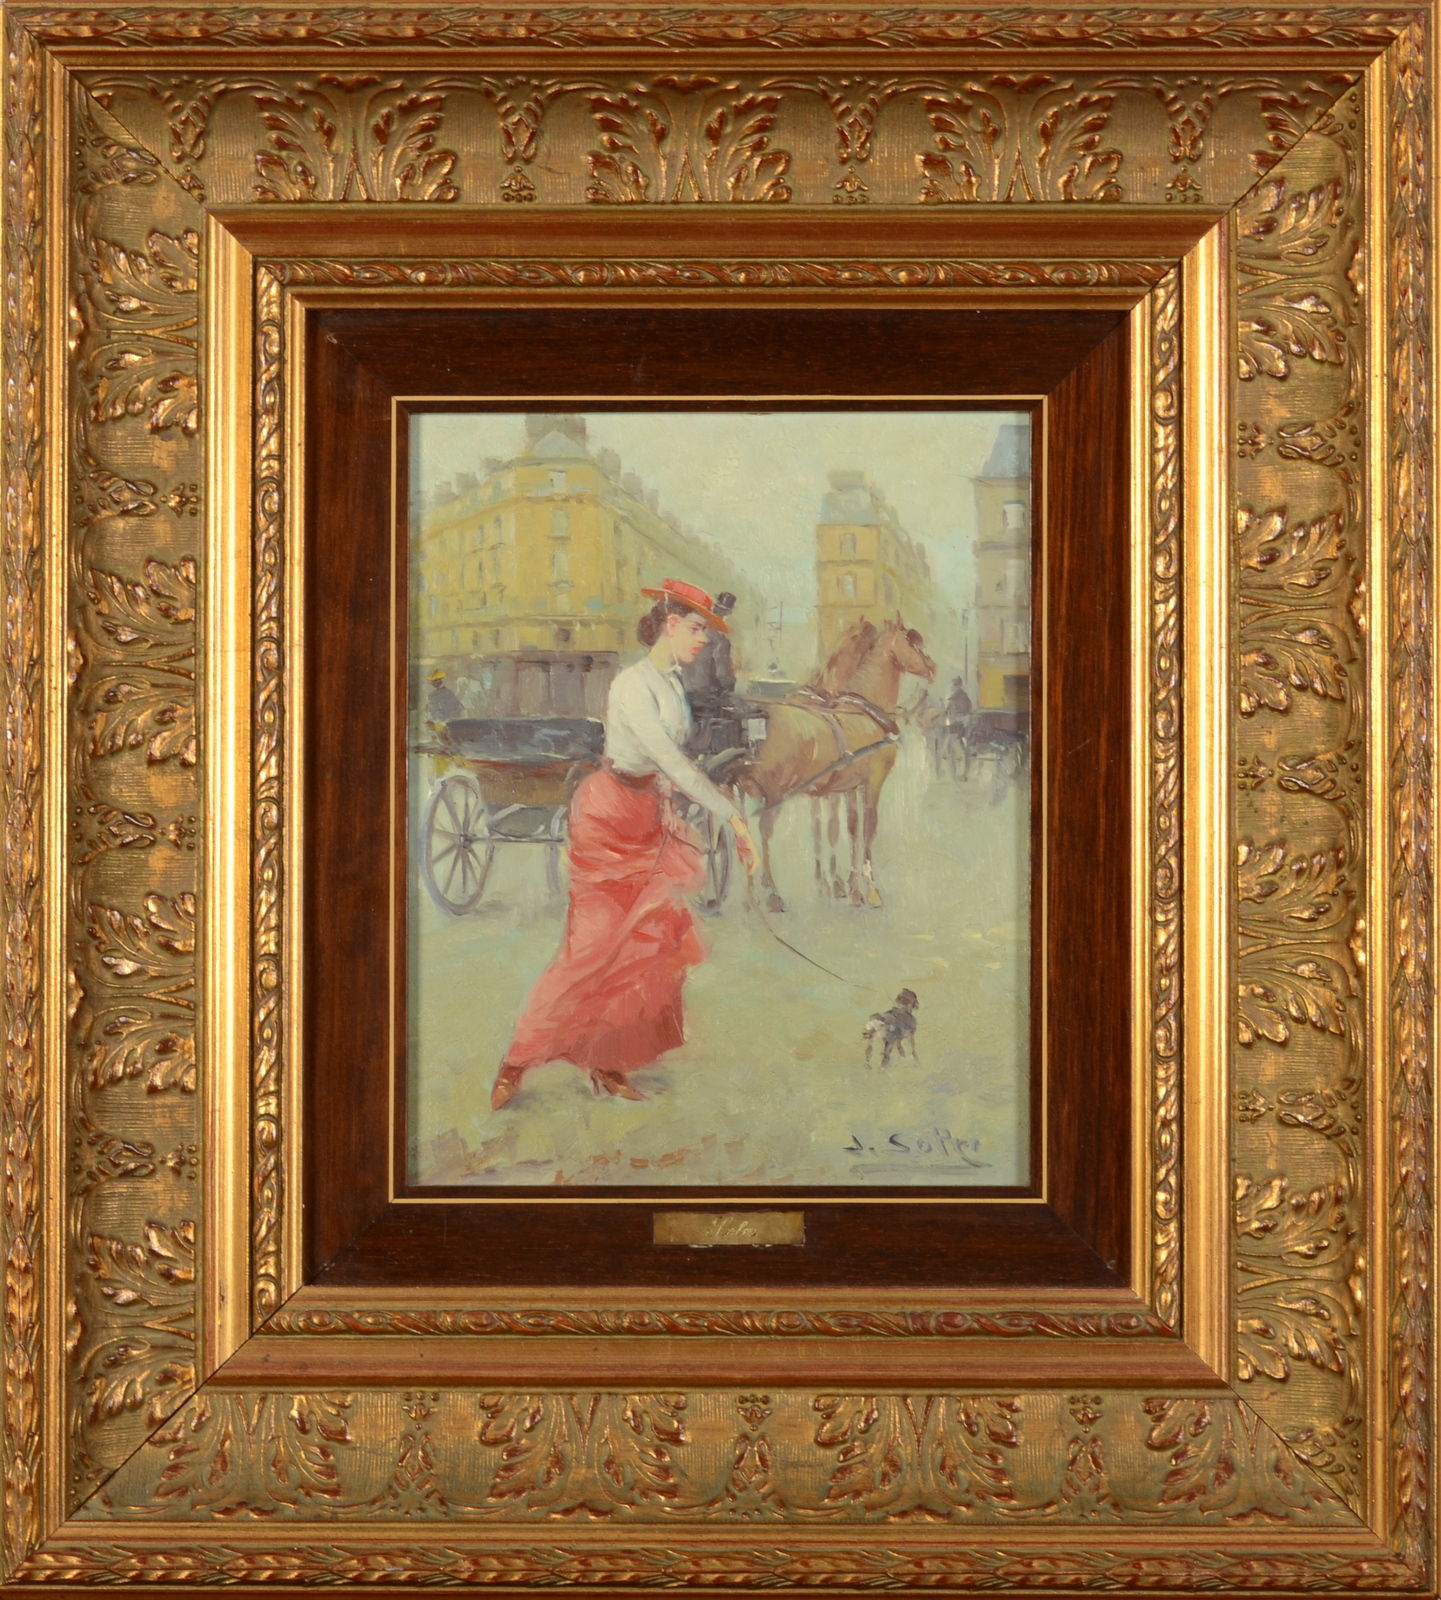 JUAN SOLER An Edwardian lady walking her dog in a Parisian Street Oil on canvas Signed 26 x 20. - Image 2 of 2